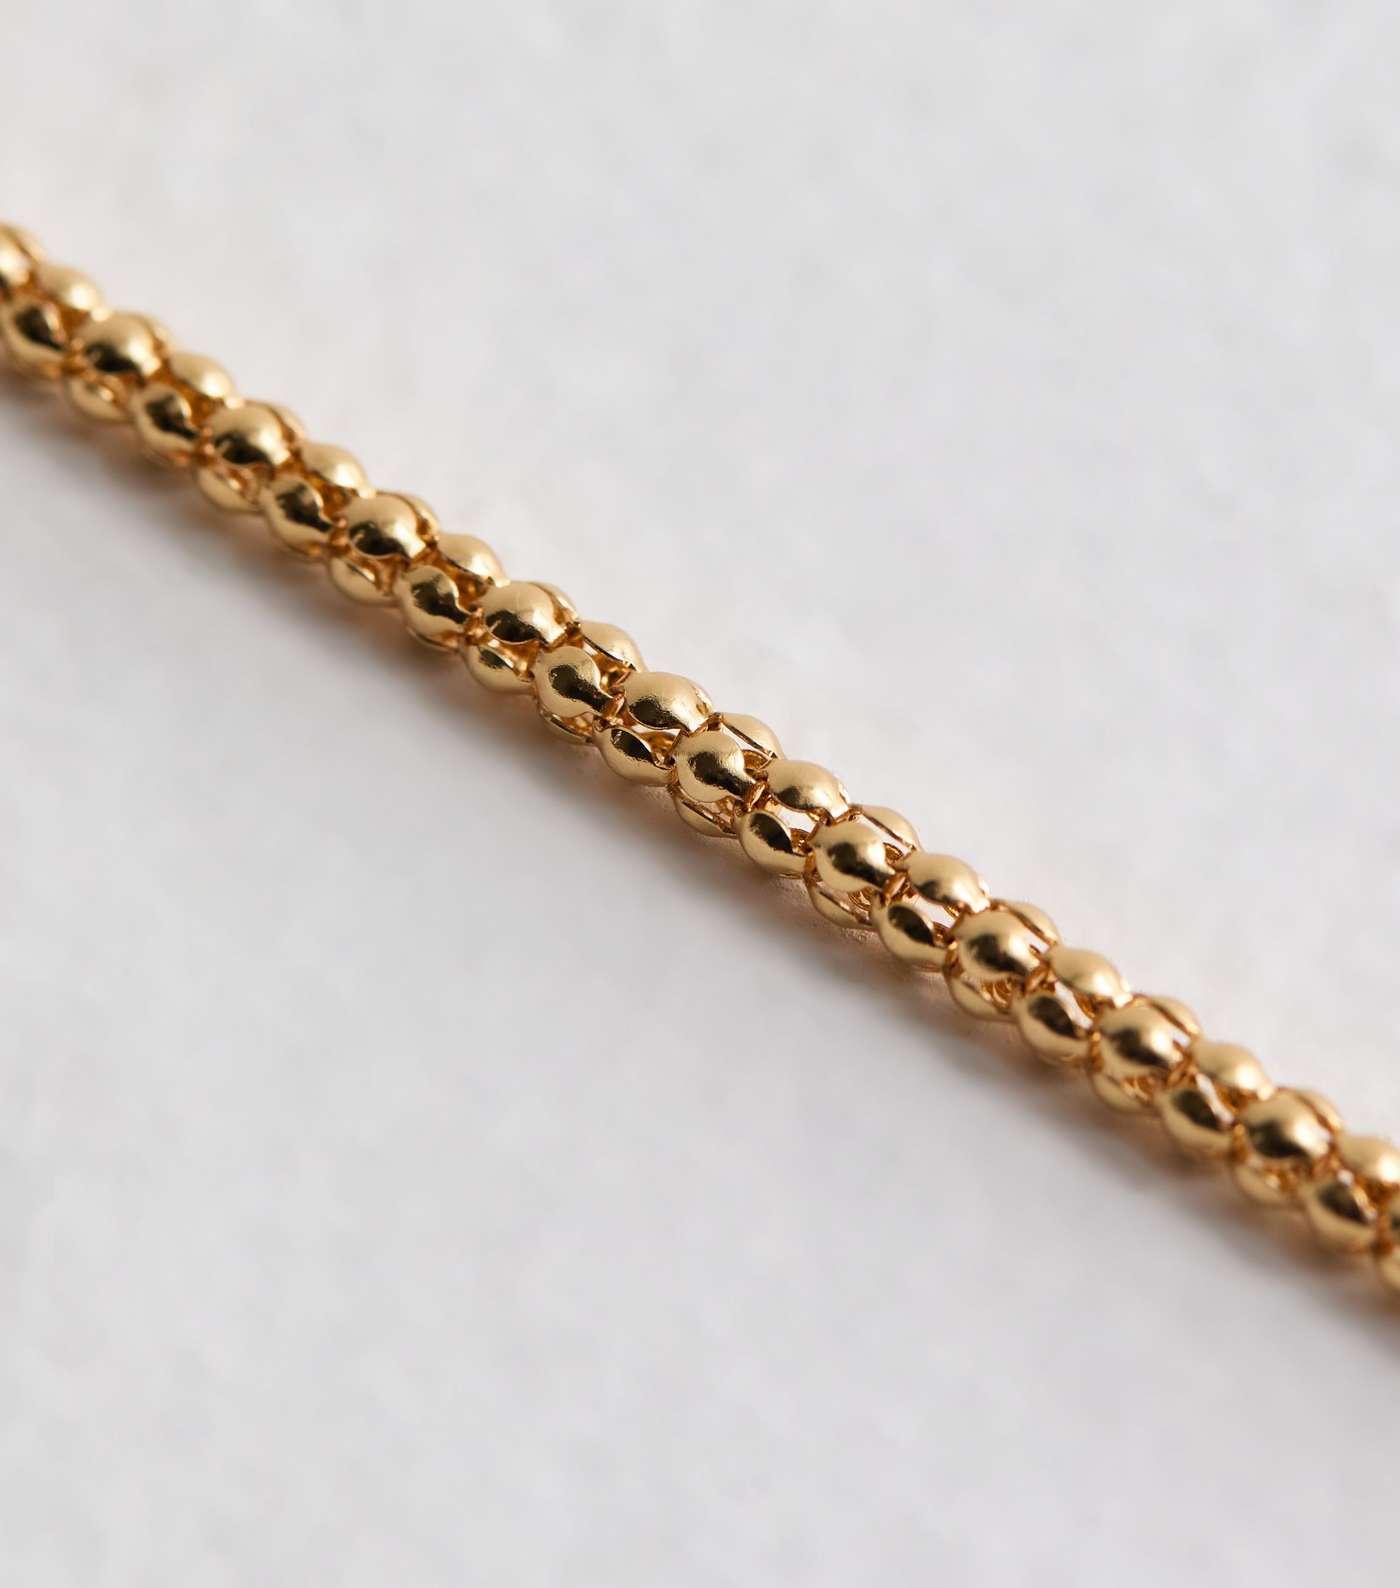 Real Gold Plated Slim Ball Chain Necklace Image 4